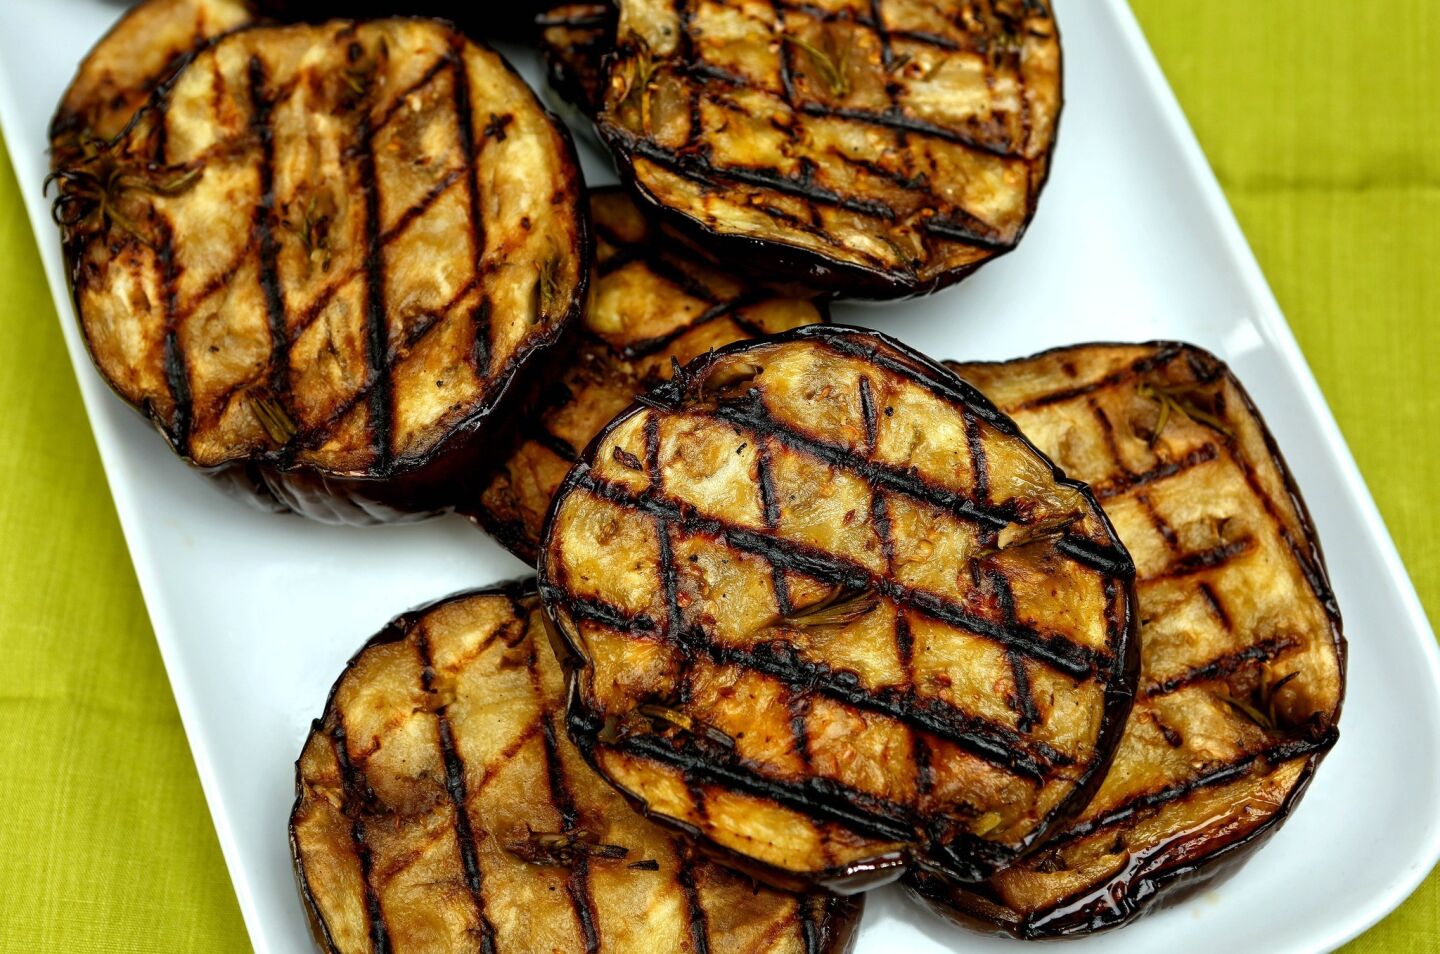 Recipe: Grilled eggplant with anchovies, garlic and rosemary